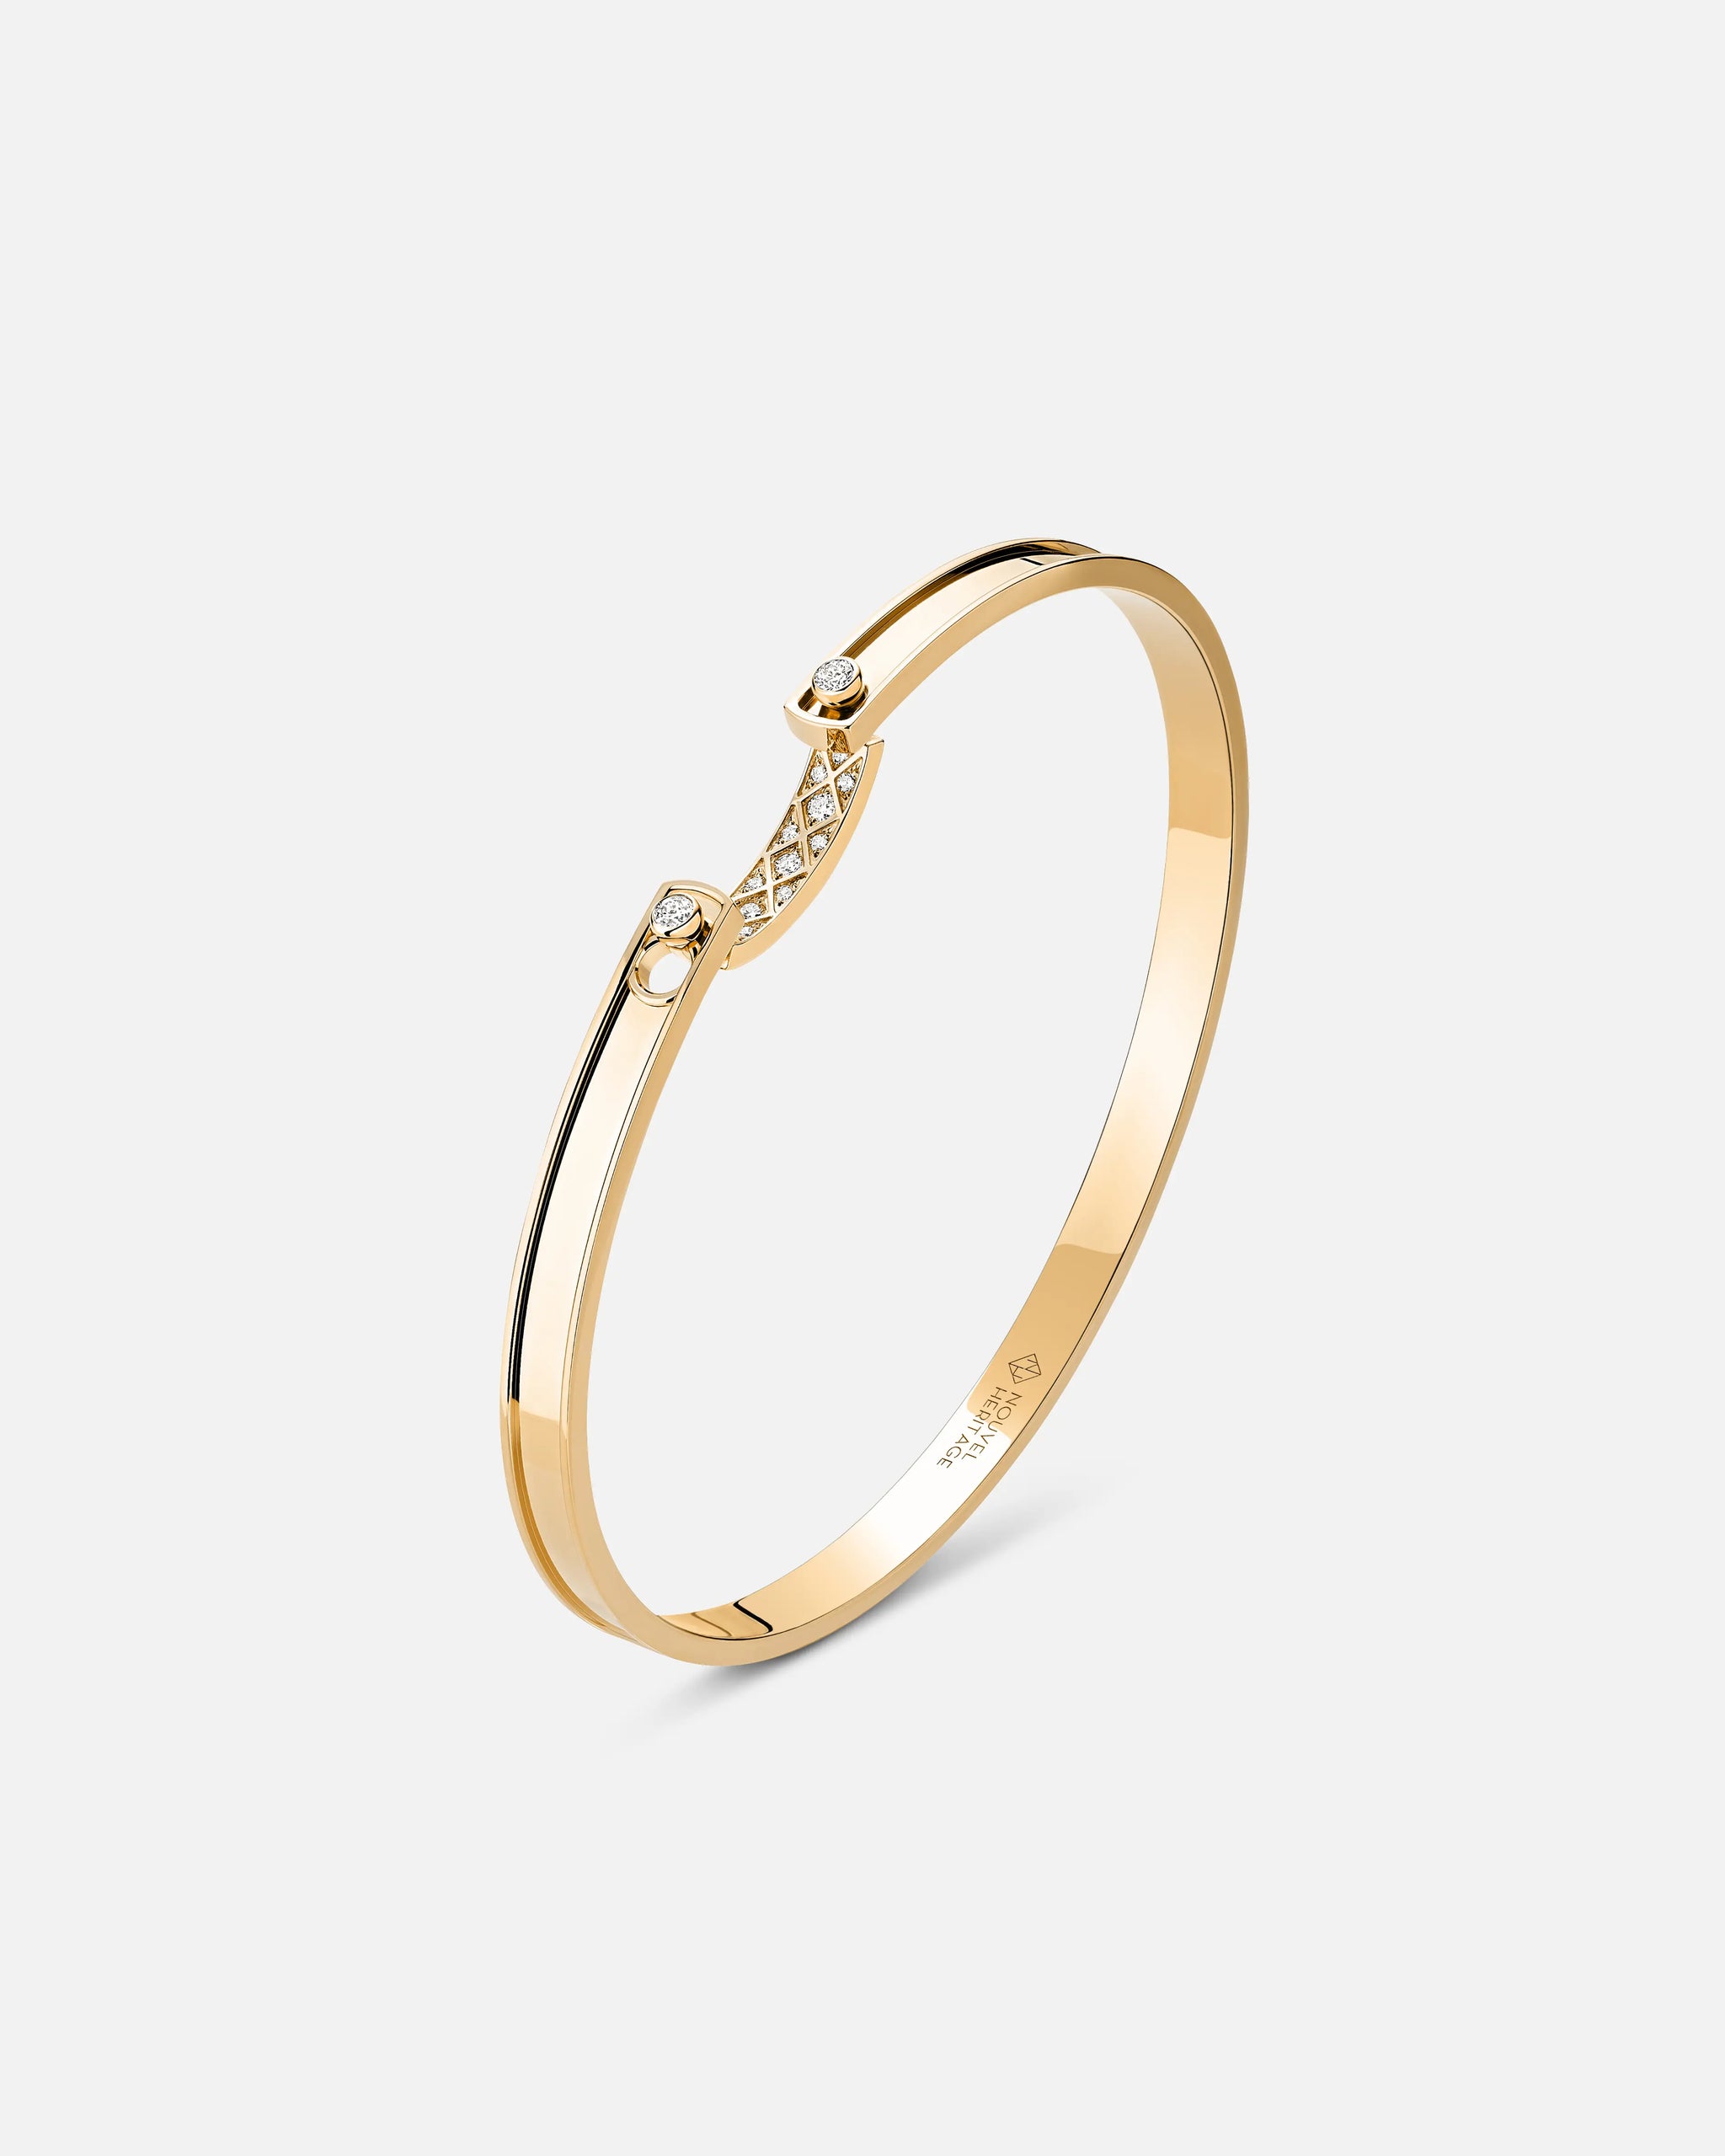 Parisian Stroll Mood Bangle in Yellow Gold - 1 - Nouvel Heritage